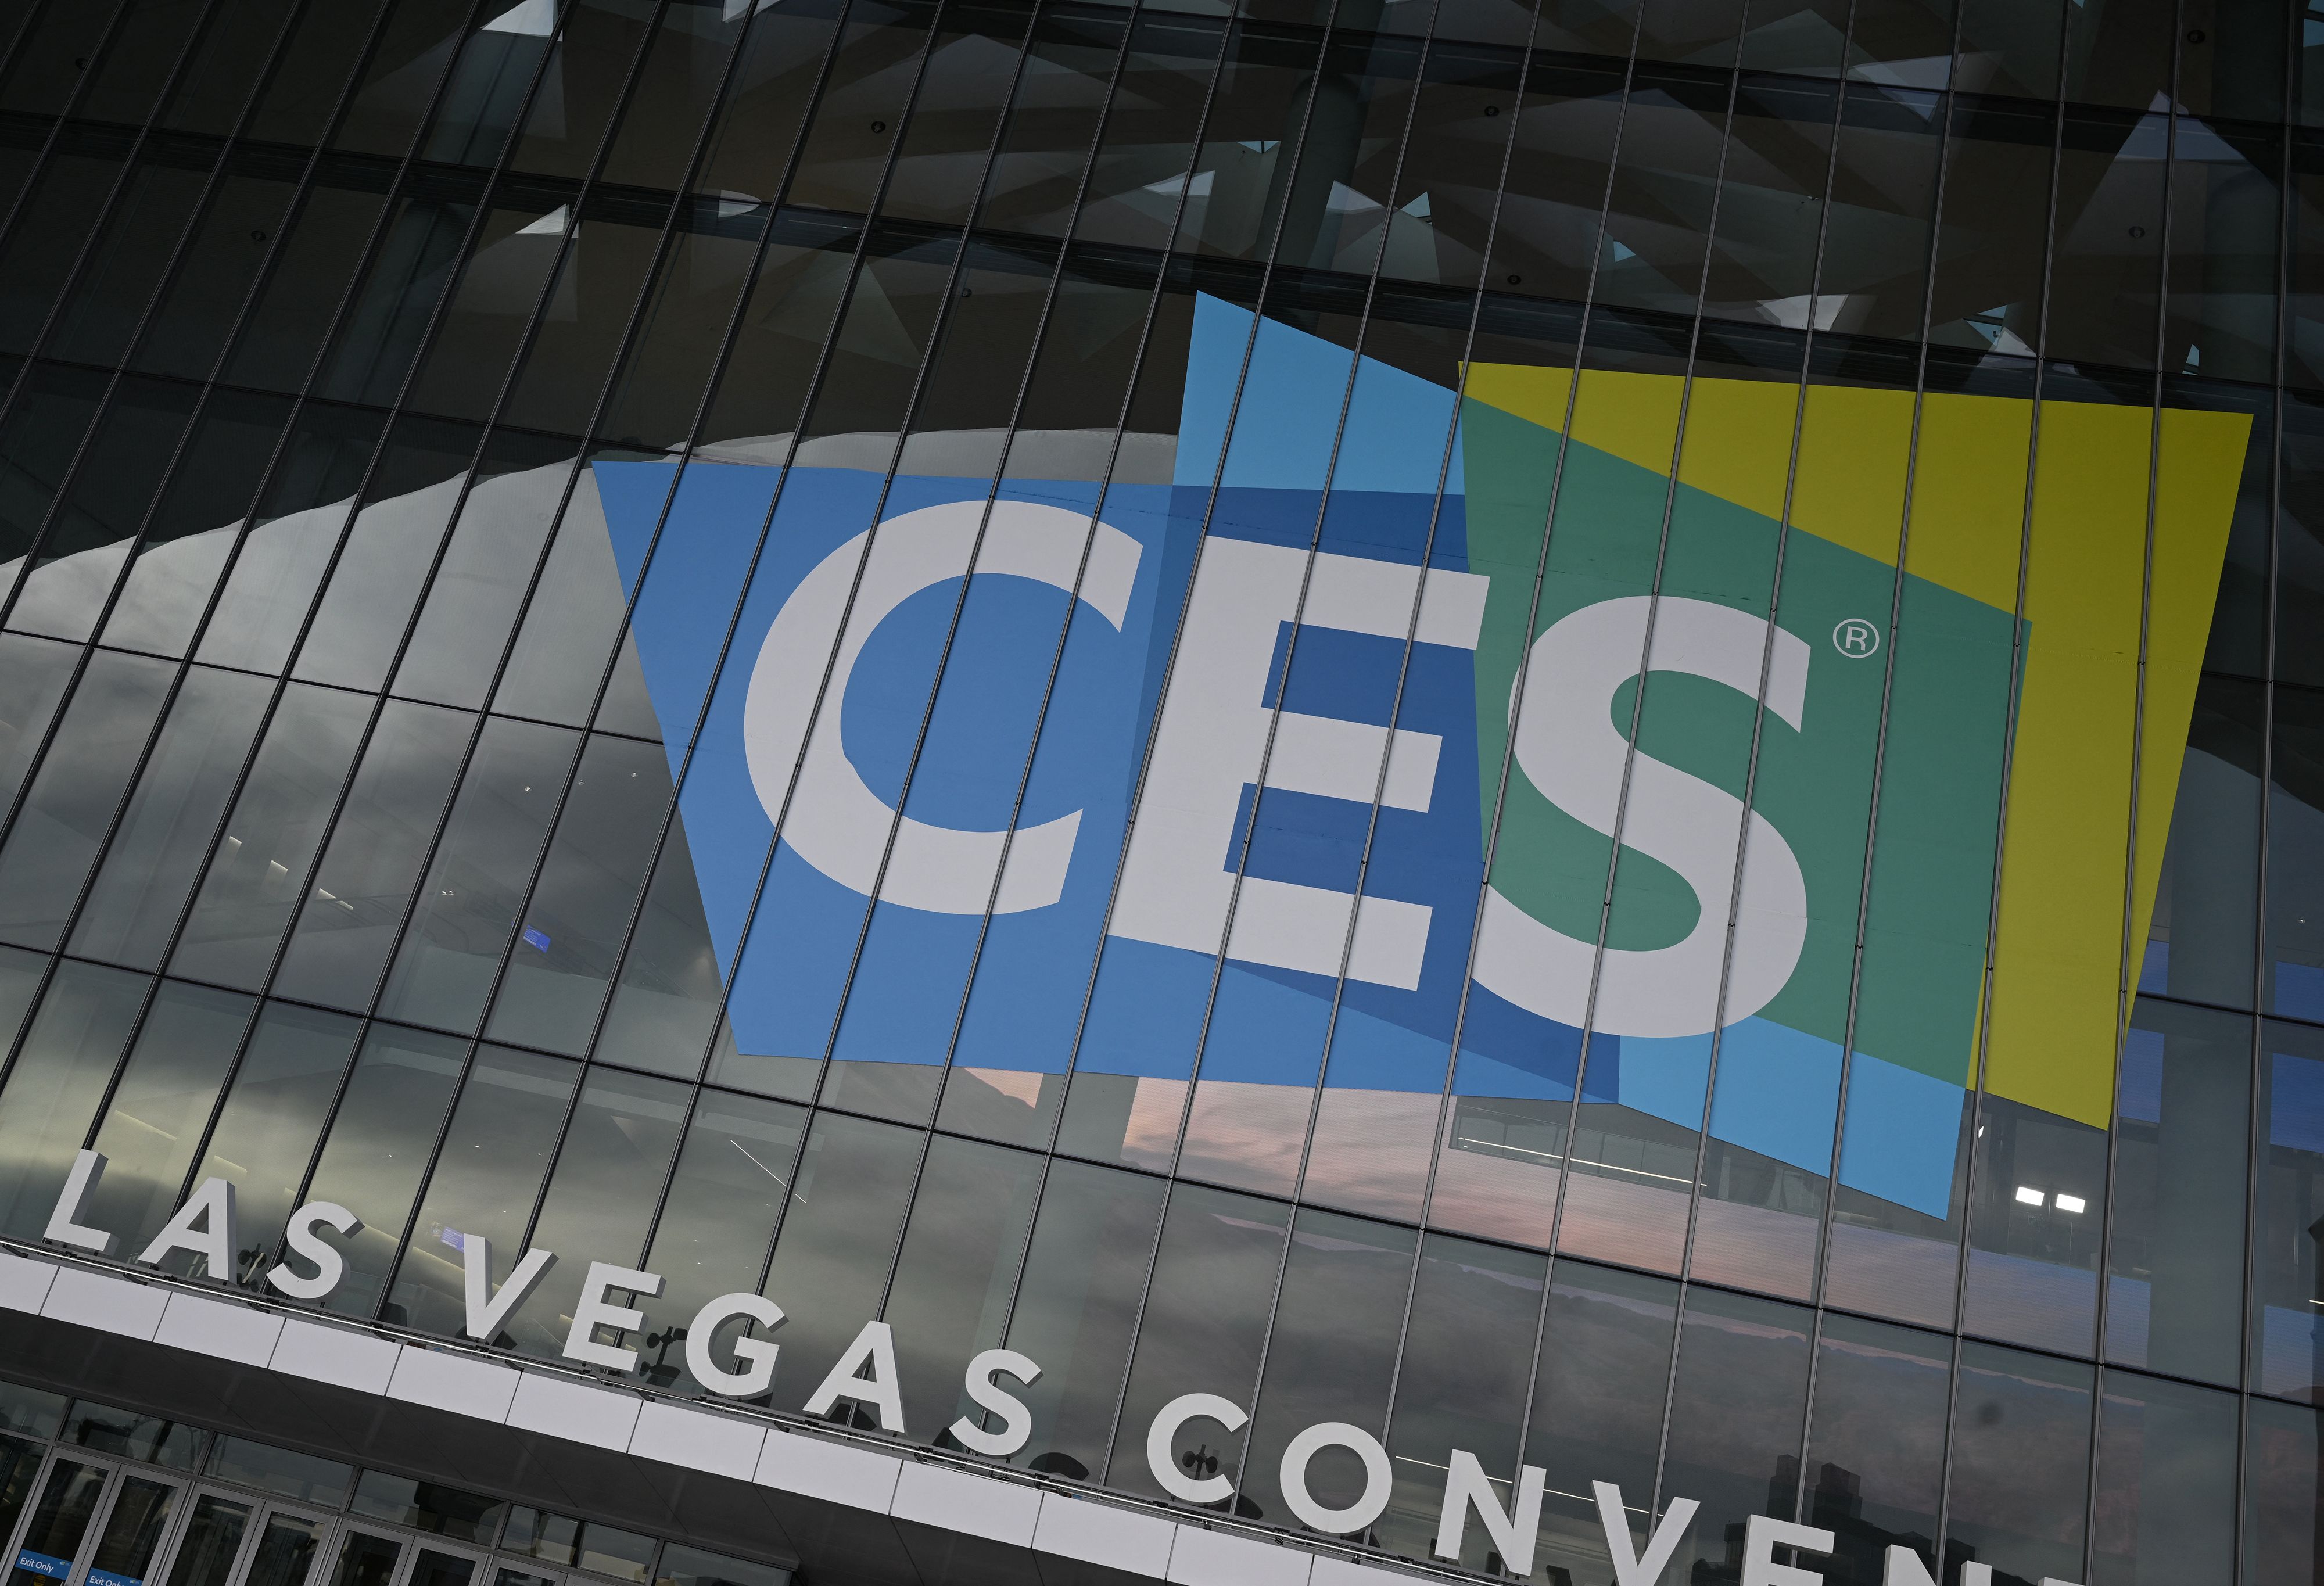 The exterior of the CES 2023 convention center